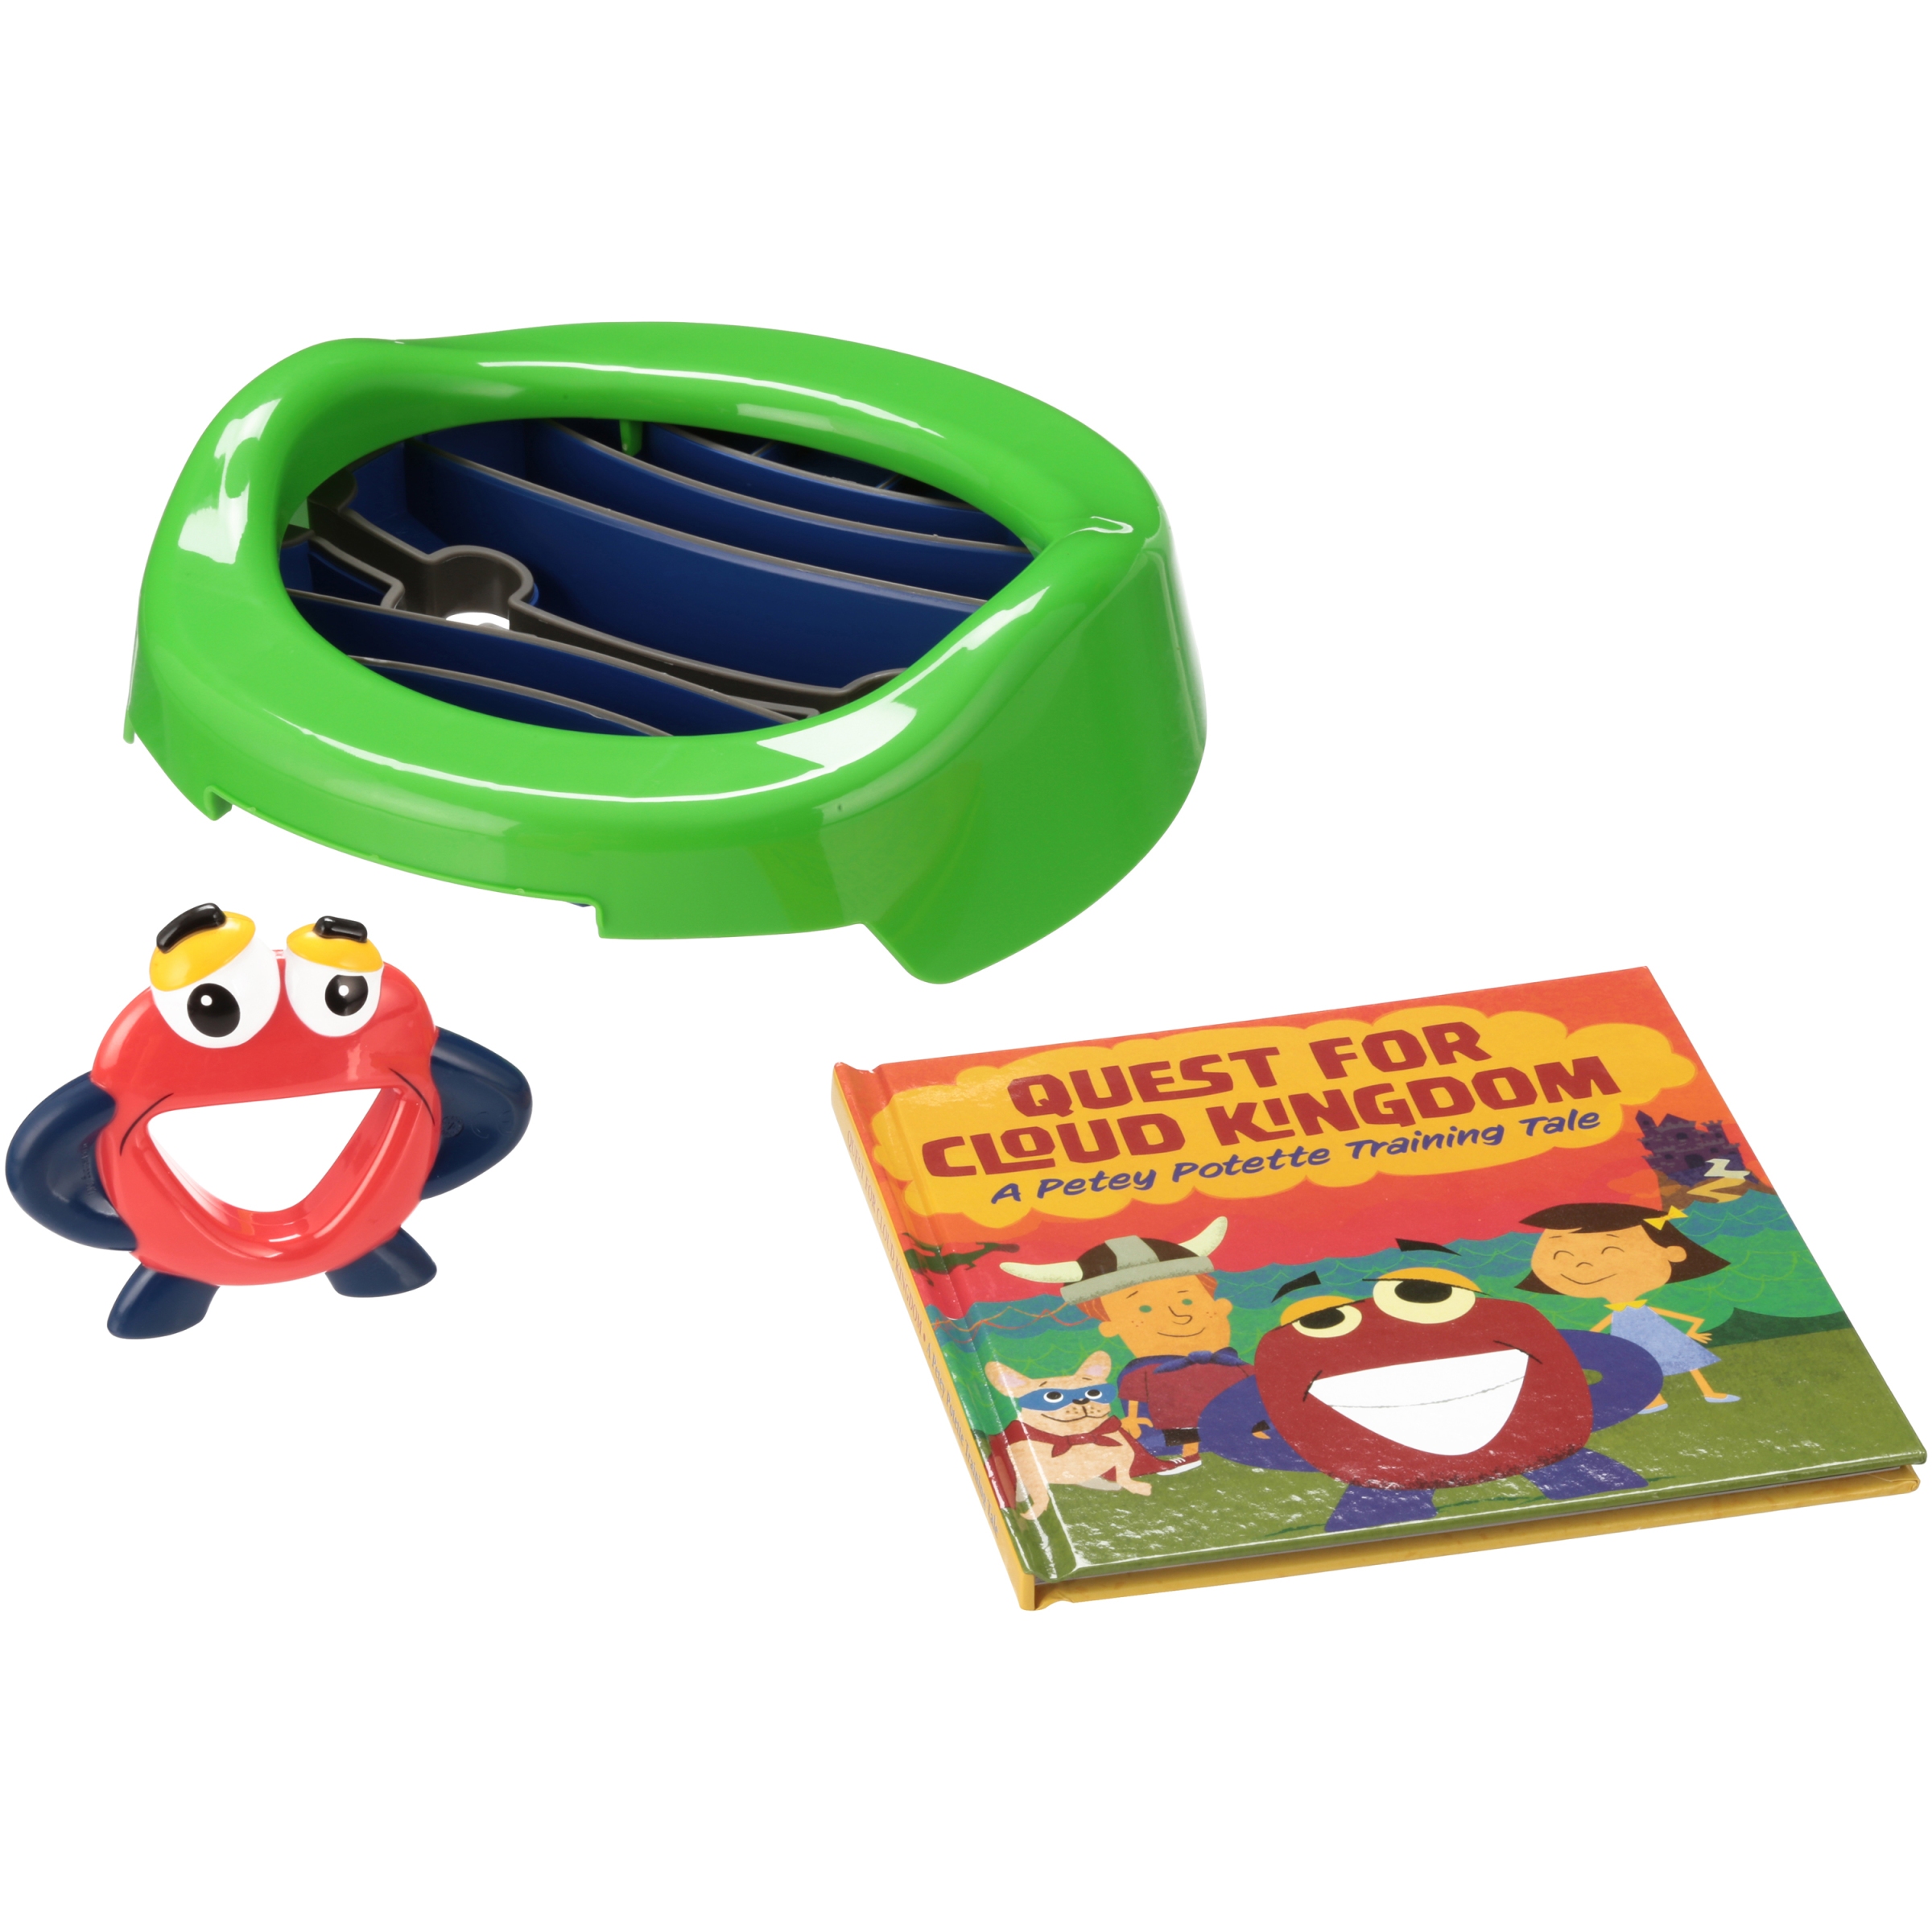 Mr. Petey Potette 2-in-1 Potty Training Kit in Green - image 1 of 4